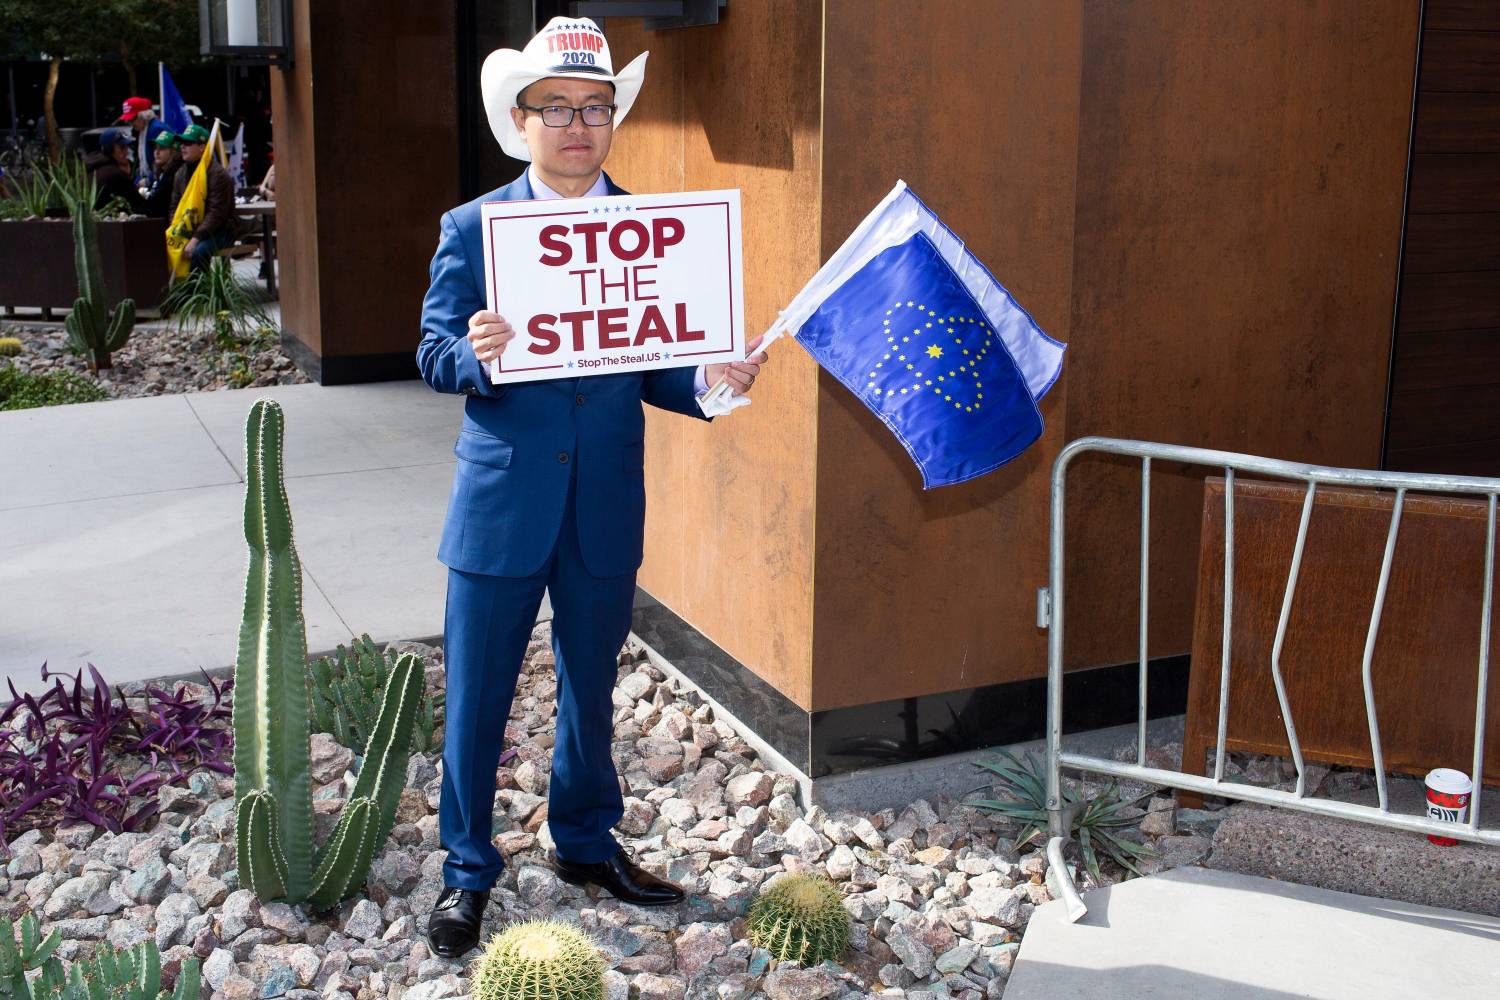 A supporter of President Donald Trump hold a sign reading "Stop the steal" while protesting against Trump's loss in the 2020 election.